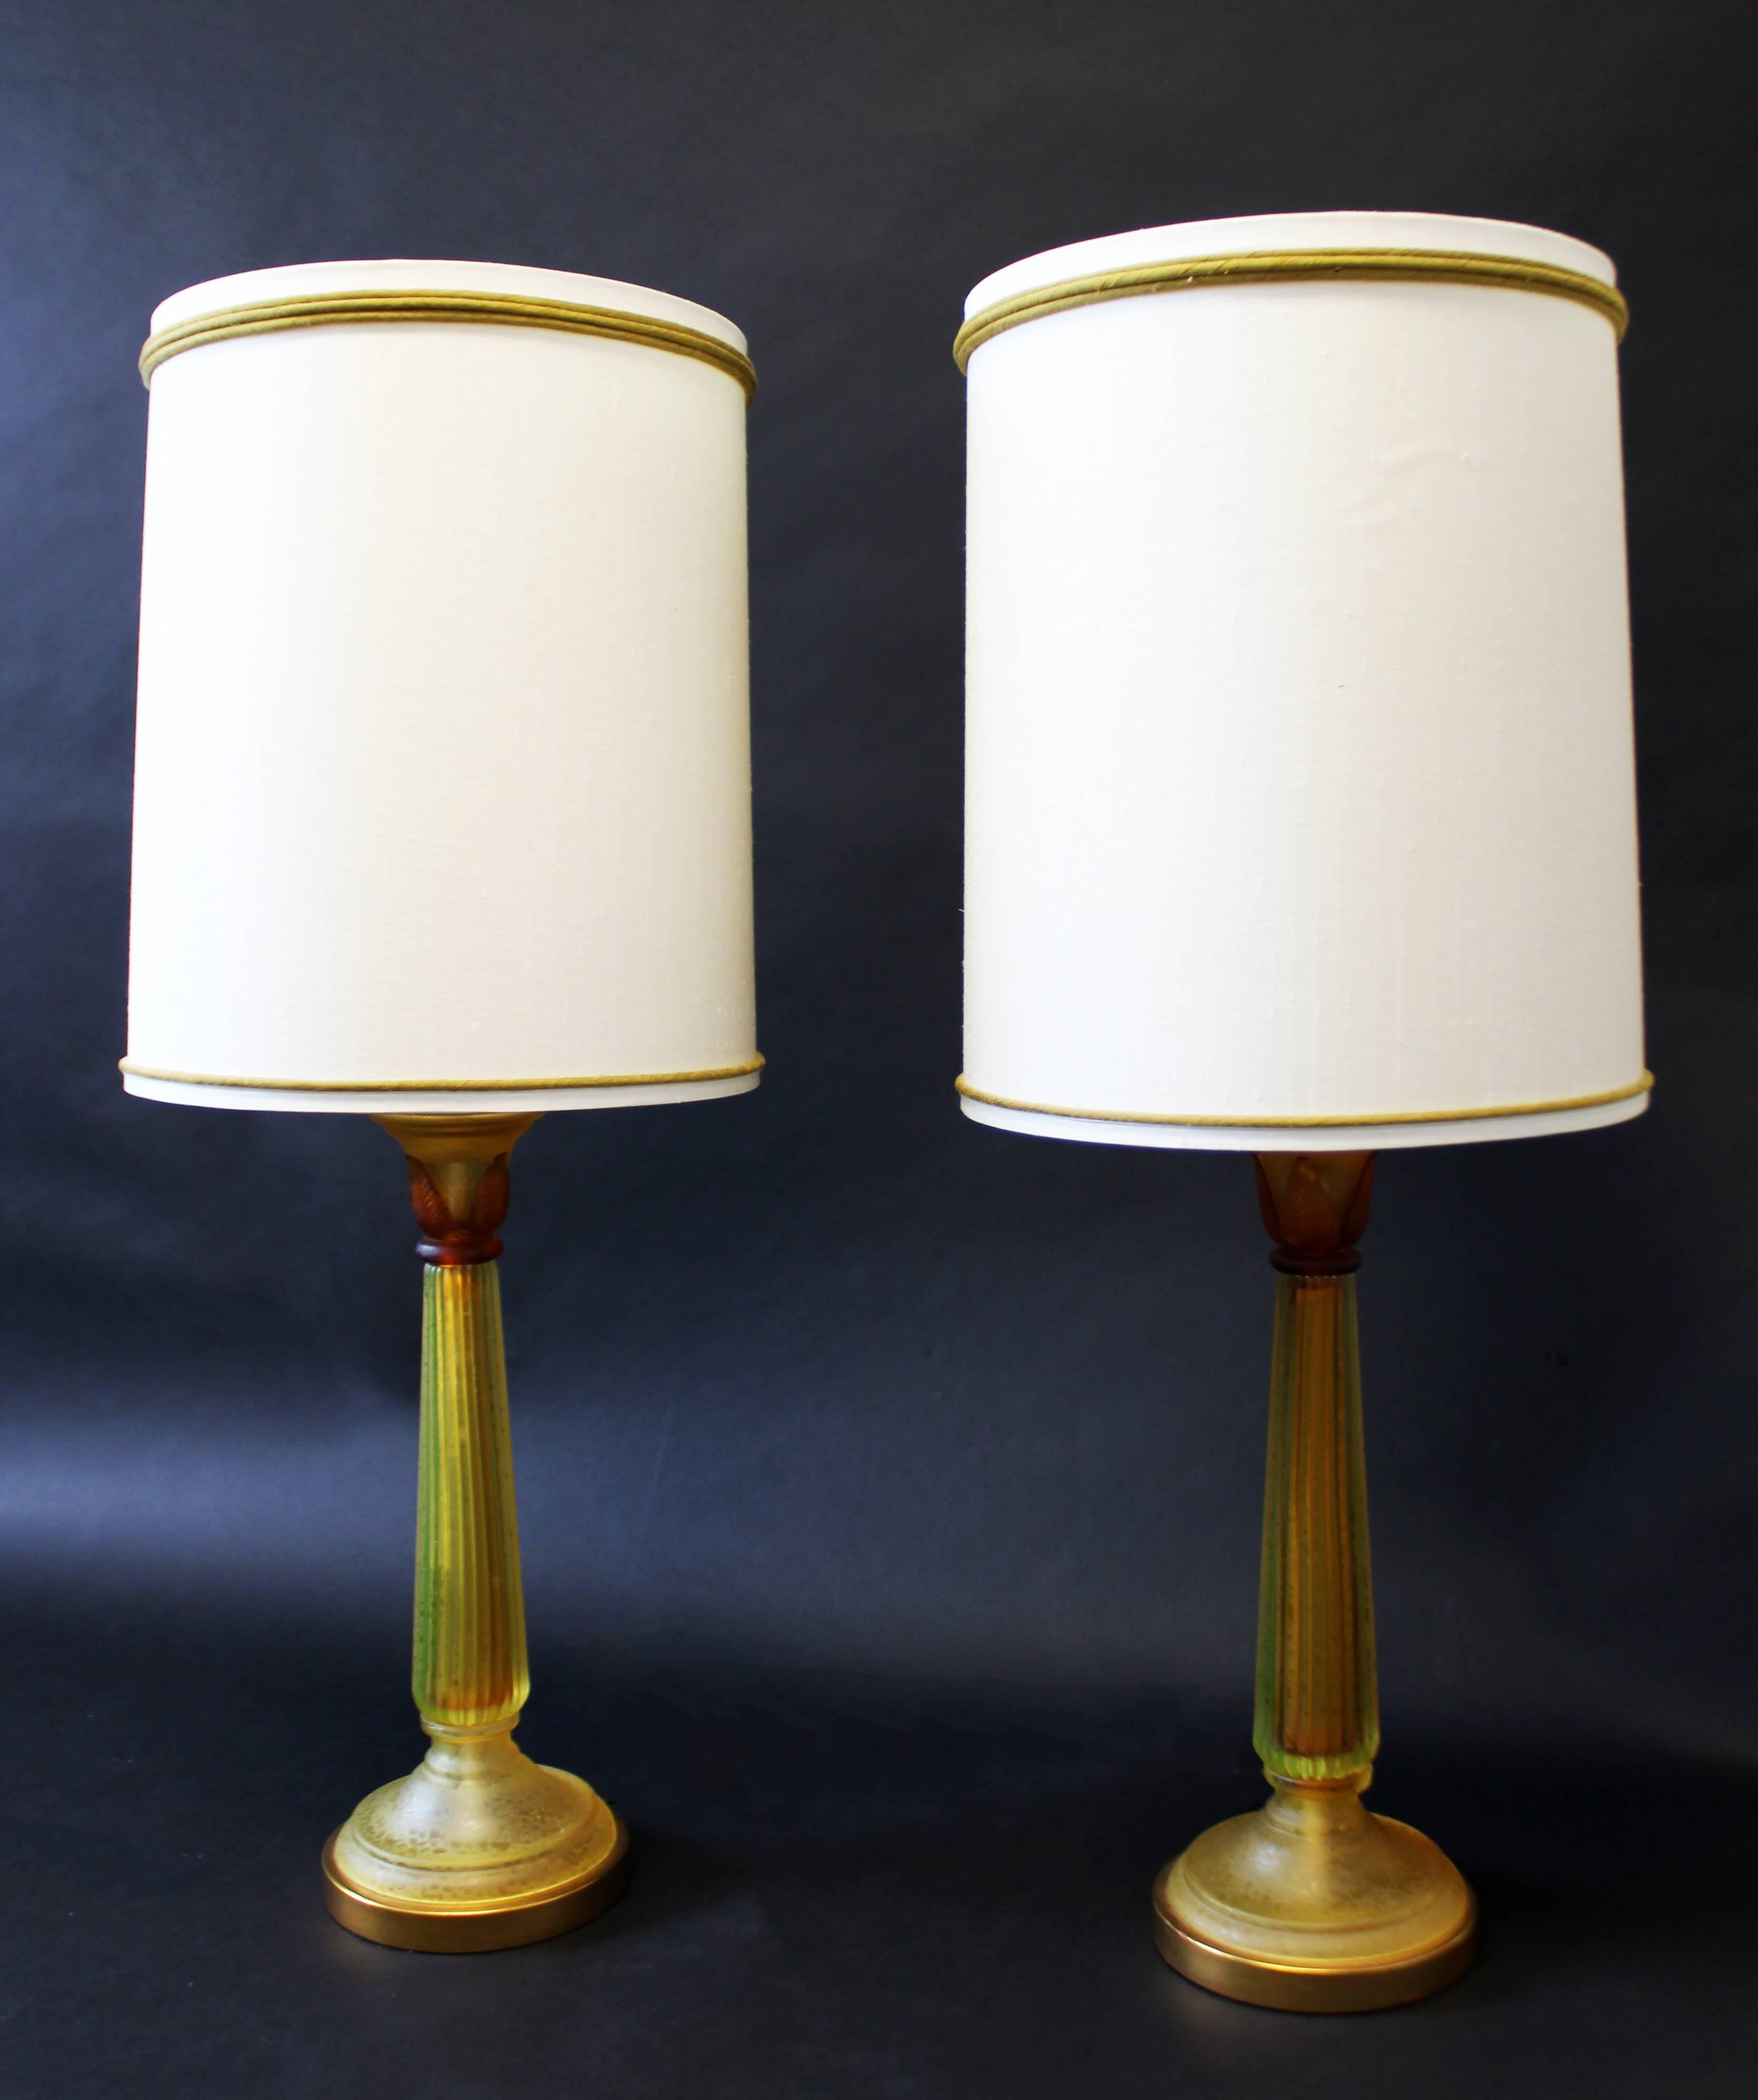 For your consideration is a magnificent pair of amber colored, glass table lamps, with their original shades and finials, by Marbro Lamp Co. In excellent condition. The dimensions of the lamps are 8